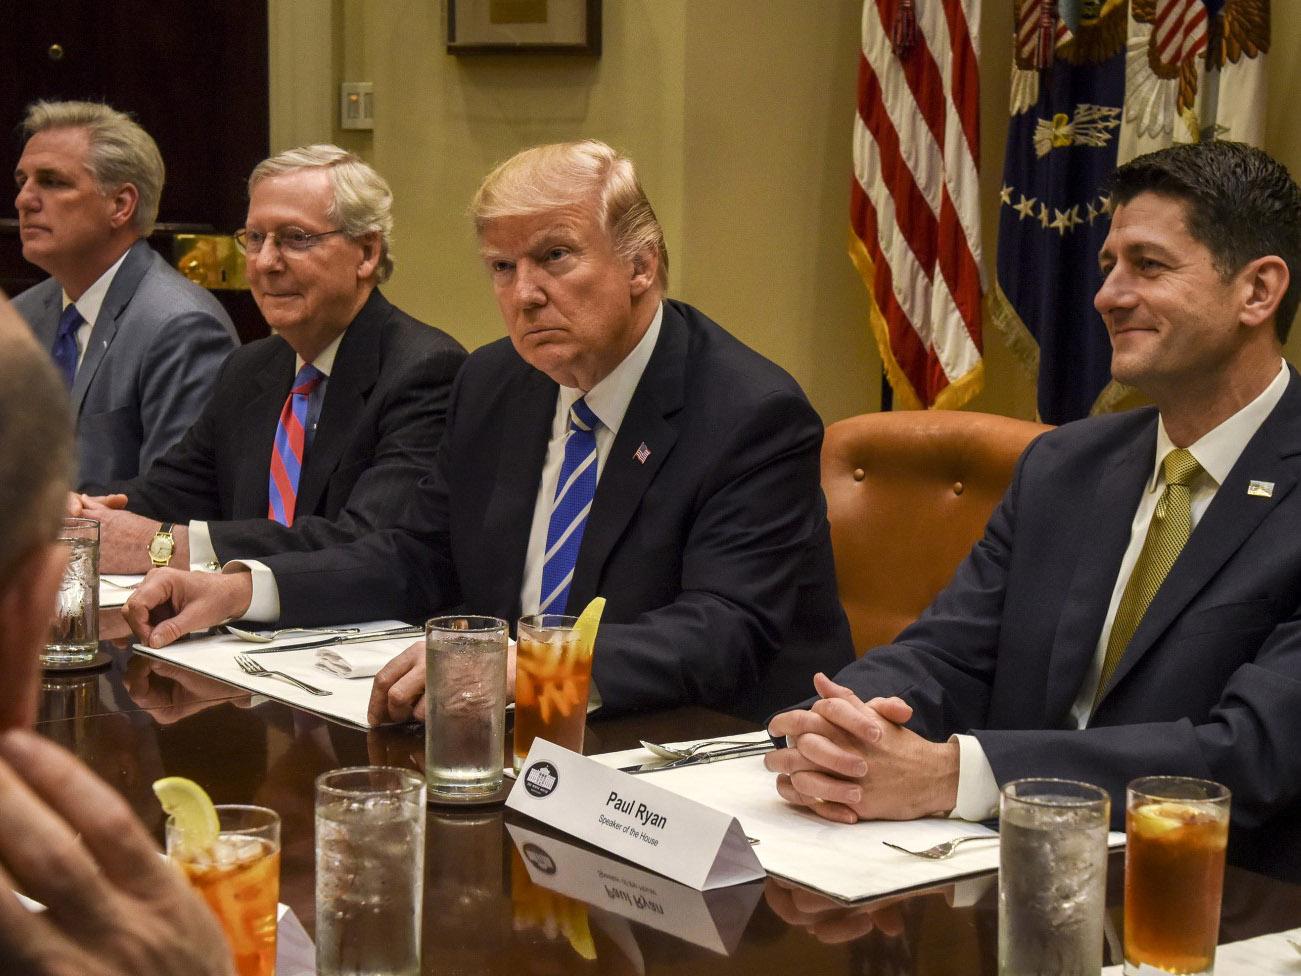 President Trump meets with Republican congressional leadership, including Senate Majority Leader Mitch McConnell, second left, and House Speaker Paul Ryan, right, at the White House